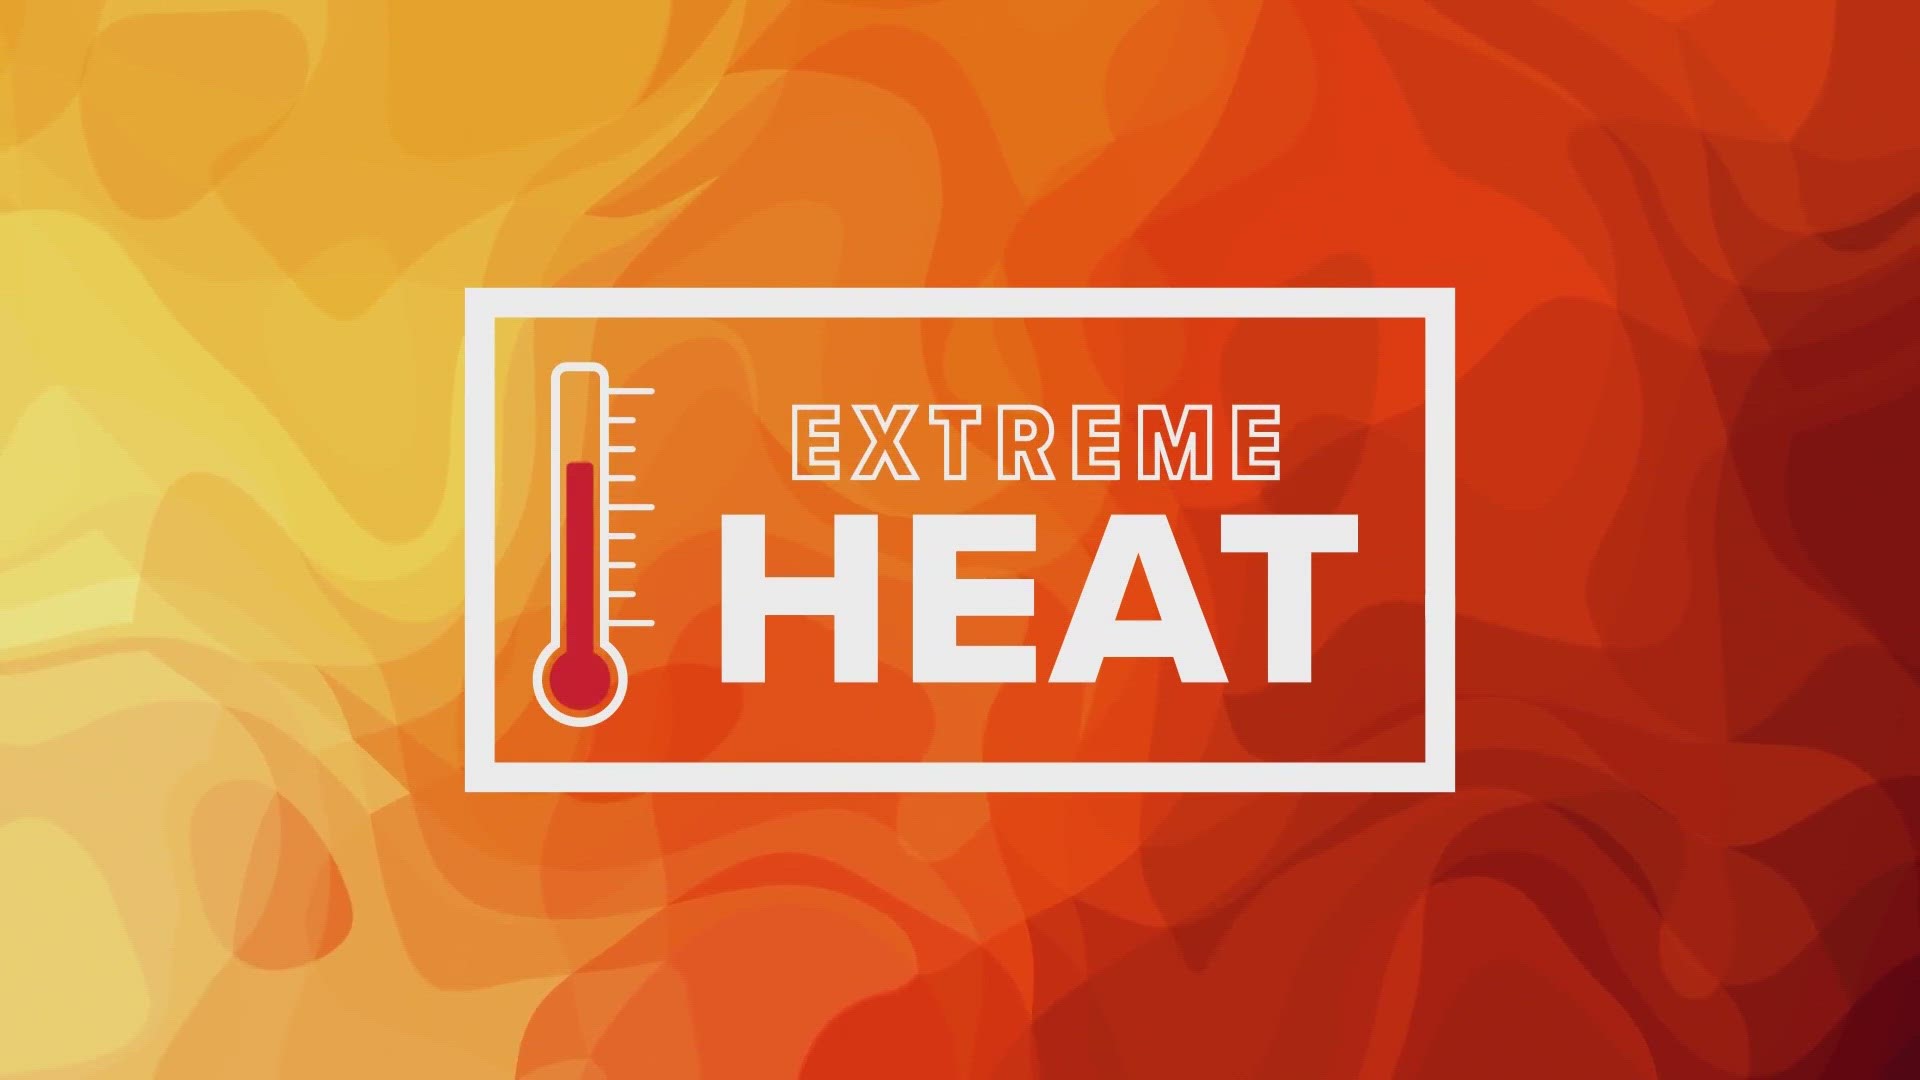 St. Louis is expecting temperatures in the triple digits Thursday and Friday. Here are some tips for staying safe during the extreme heat.